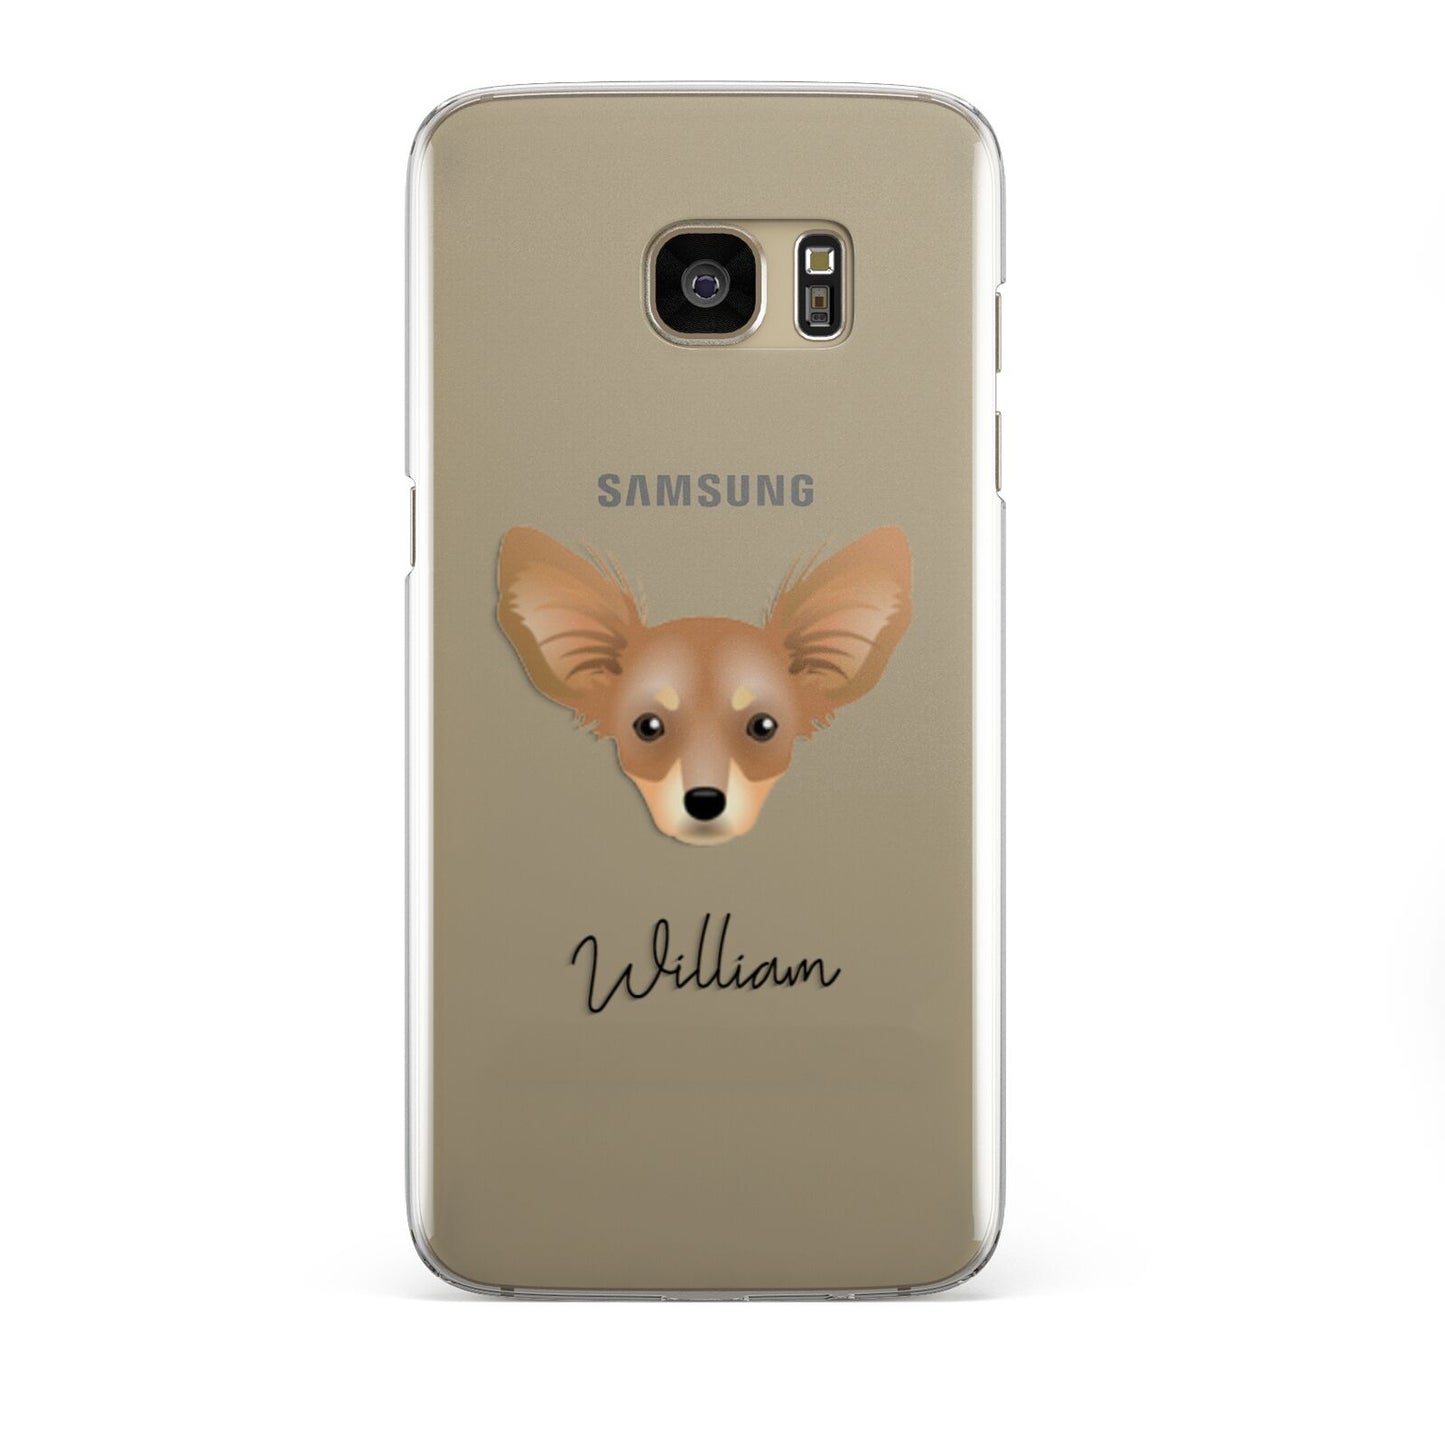 Russian Toy Personalised Samsung Galaxy S7 Edge Case